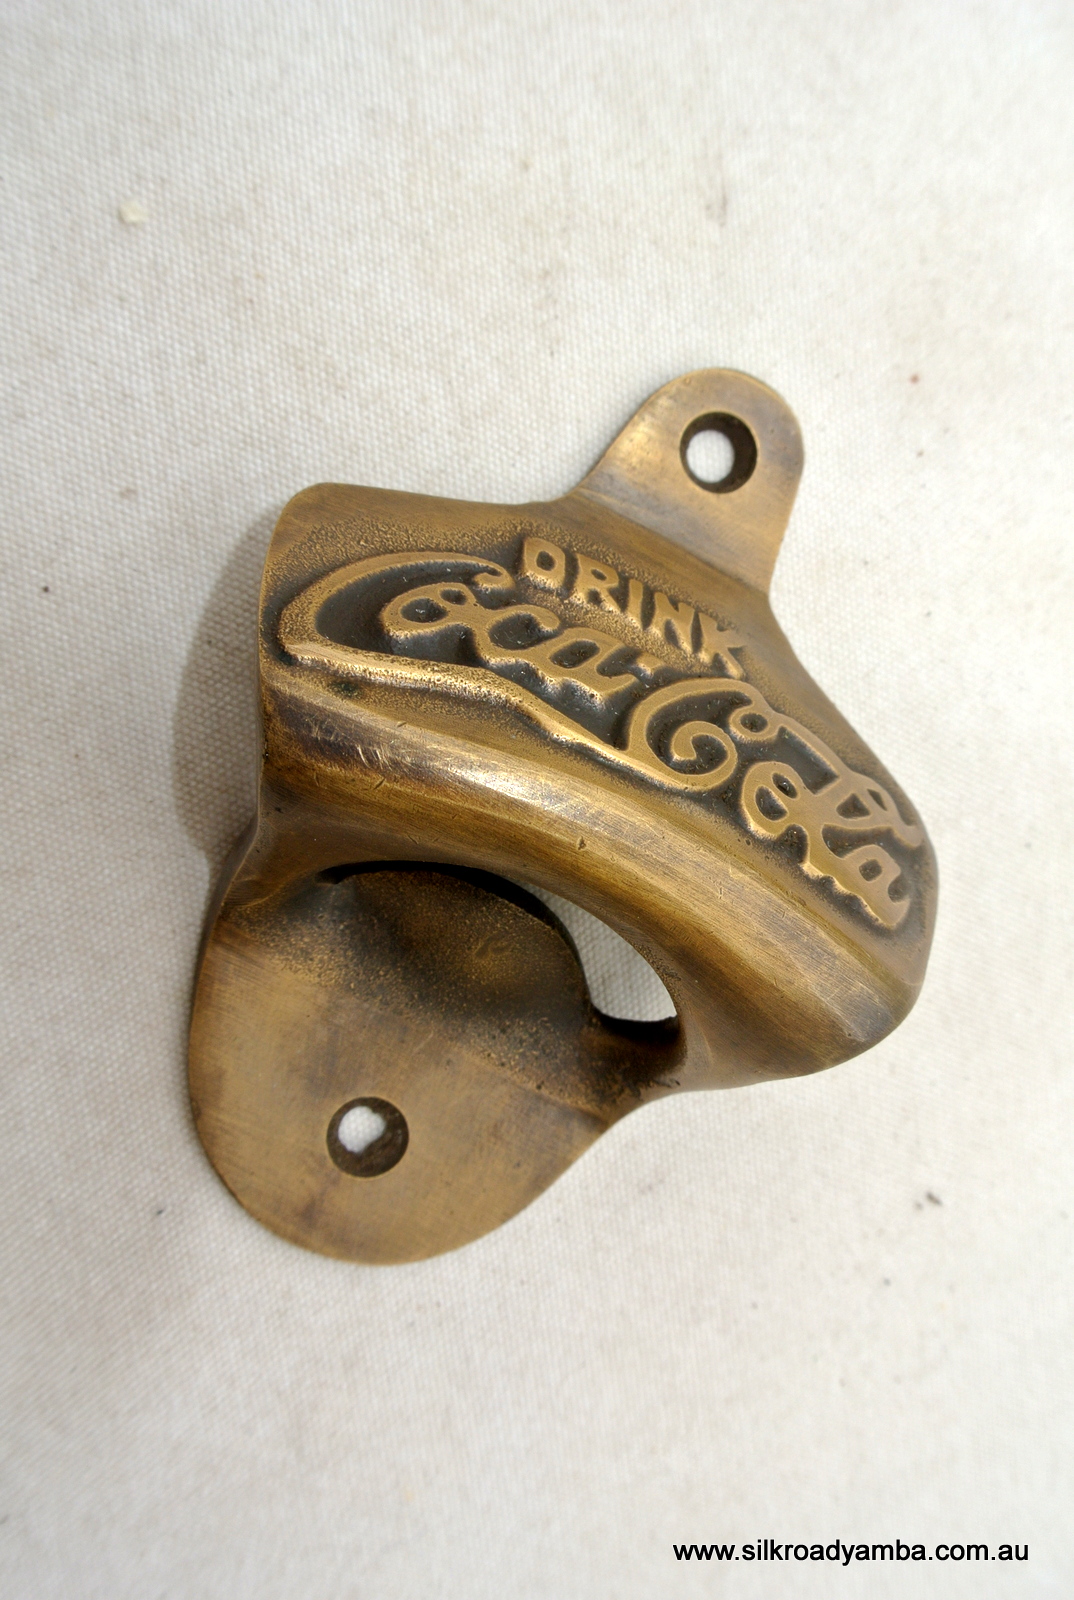 5 "COCA COLA" Bottle Opener brass COKE works AGED finish screws included heavy